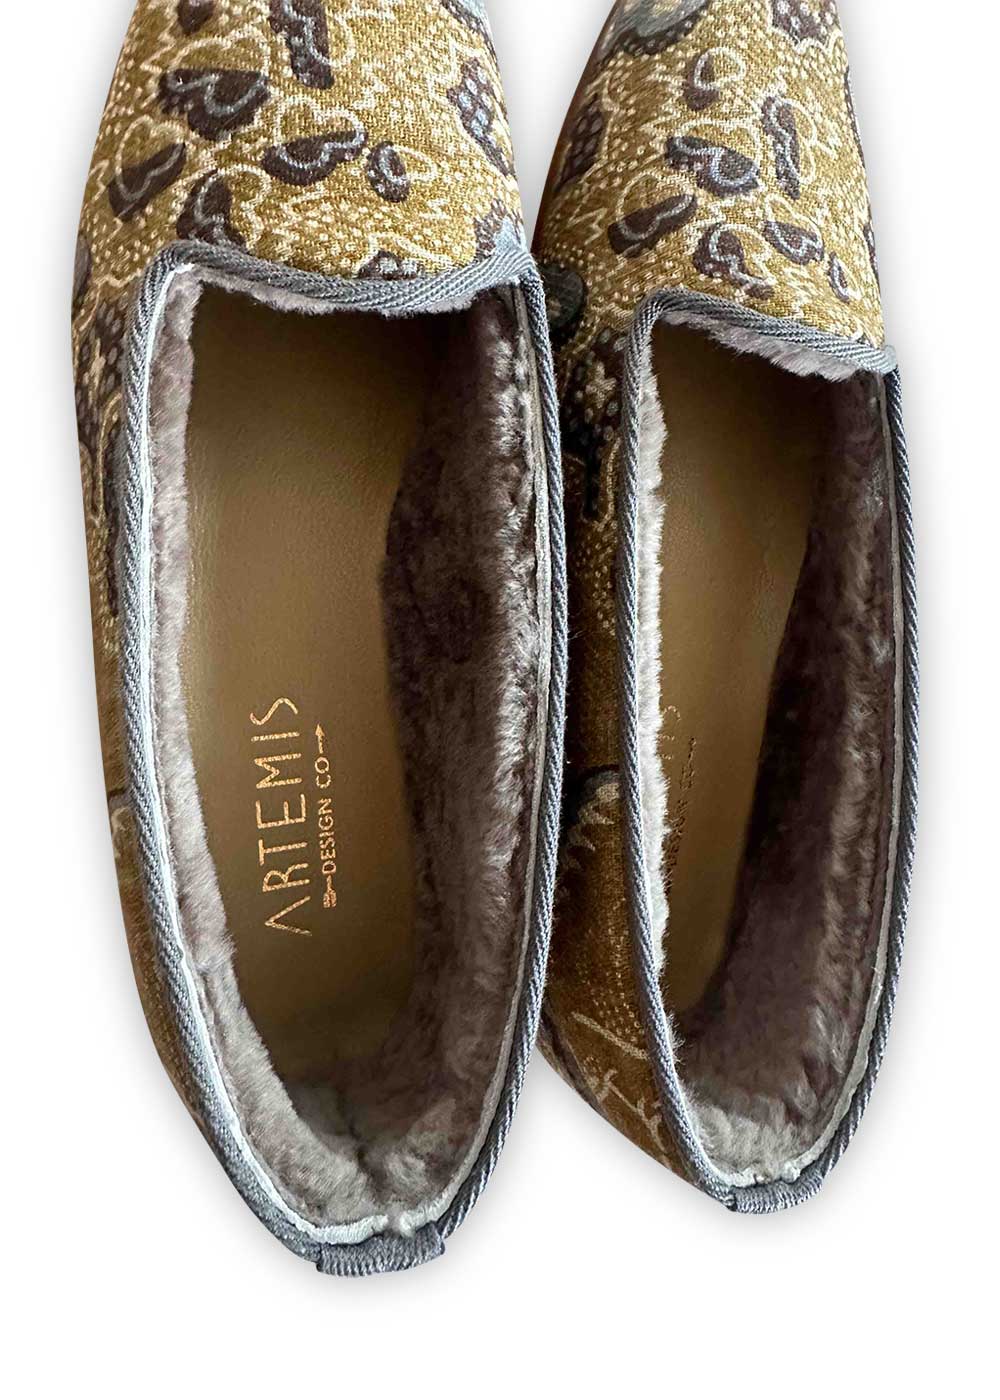 Artemis Design Co's Women's patterned cotton & shearling loafers in a color combination of grey, khaki, white, and dark grey are a stylish and cozy footwear option. The unique blend of colors creates a sophisticated yet versatile look that complements a variety of outfits. These loafers feature a patterned cotton upper for visual interest and are lined with plush shearling for warmth and comfort. (Front View)